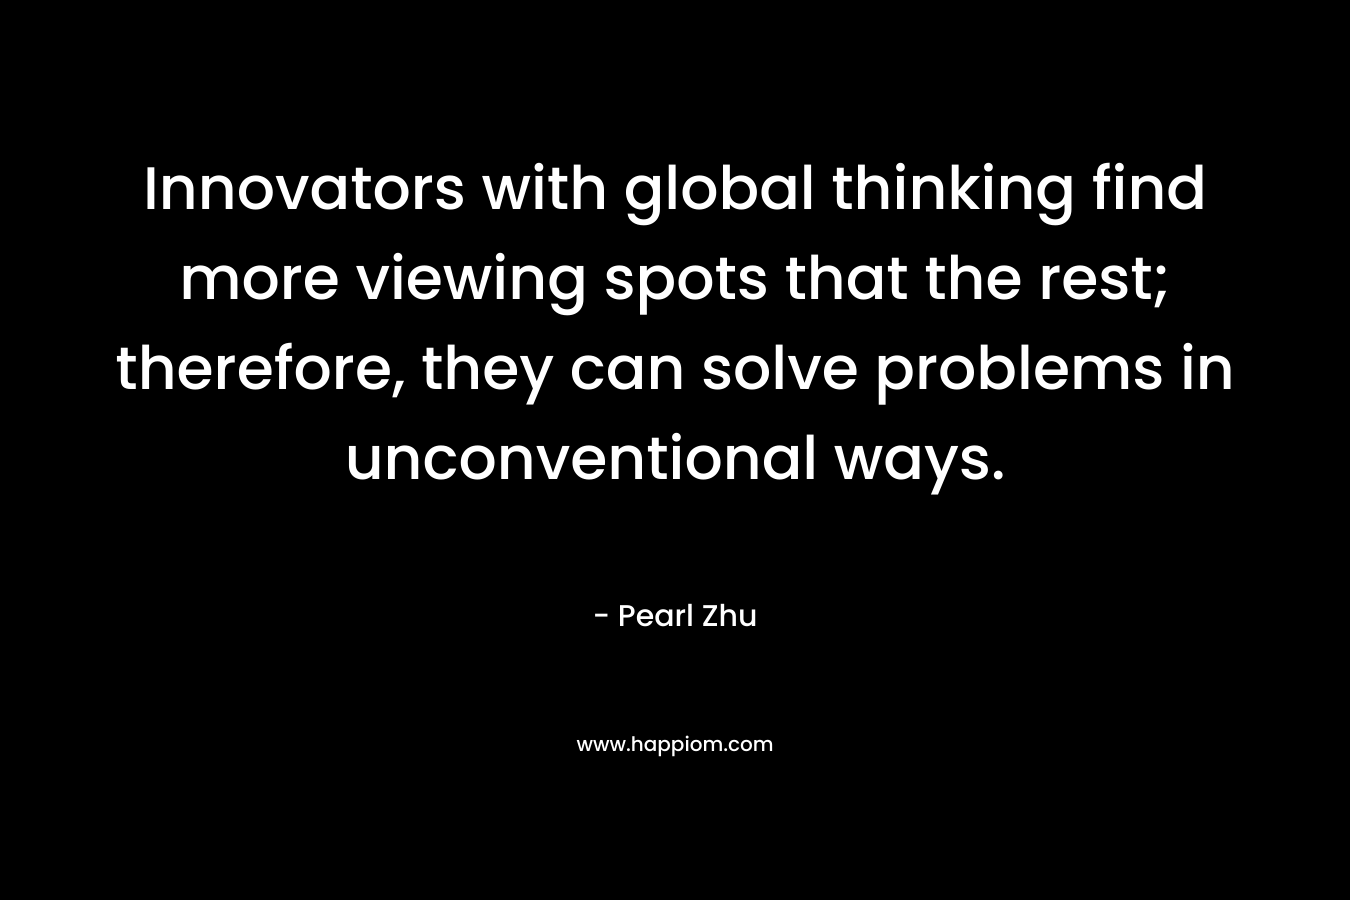 Innovators with global thinking find more viewing spots that the rest; therefore, they can solve problems in unconventional ways. – Pearl Zhu